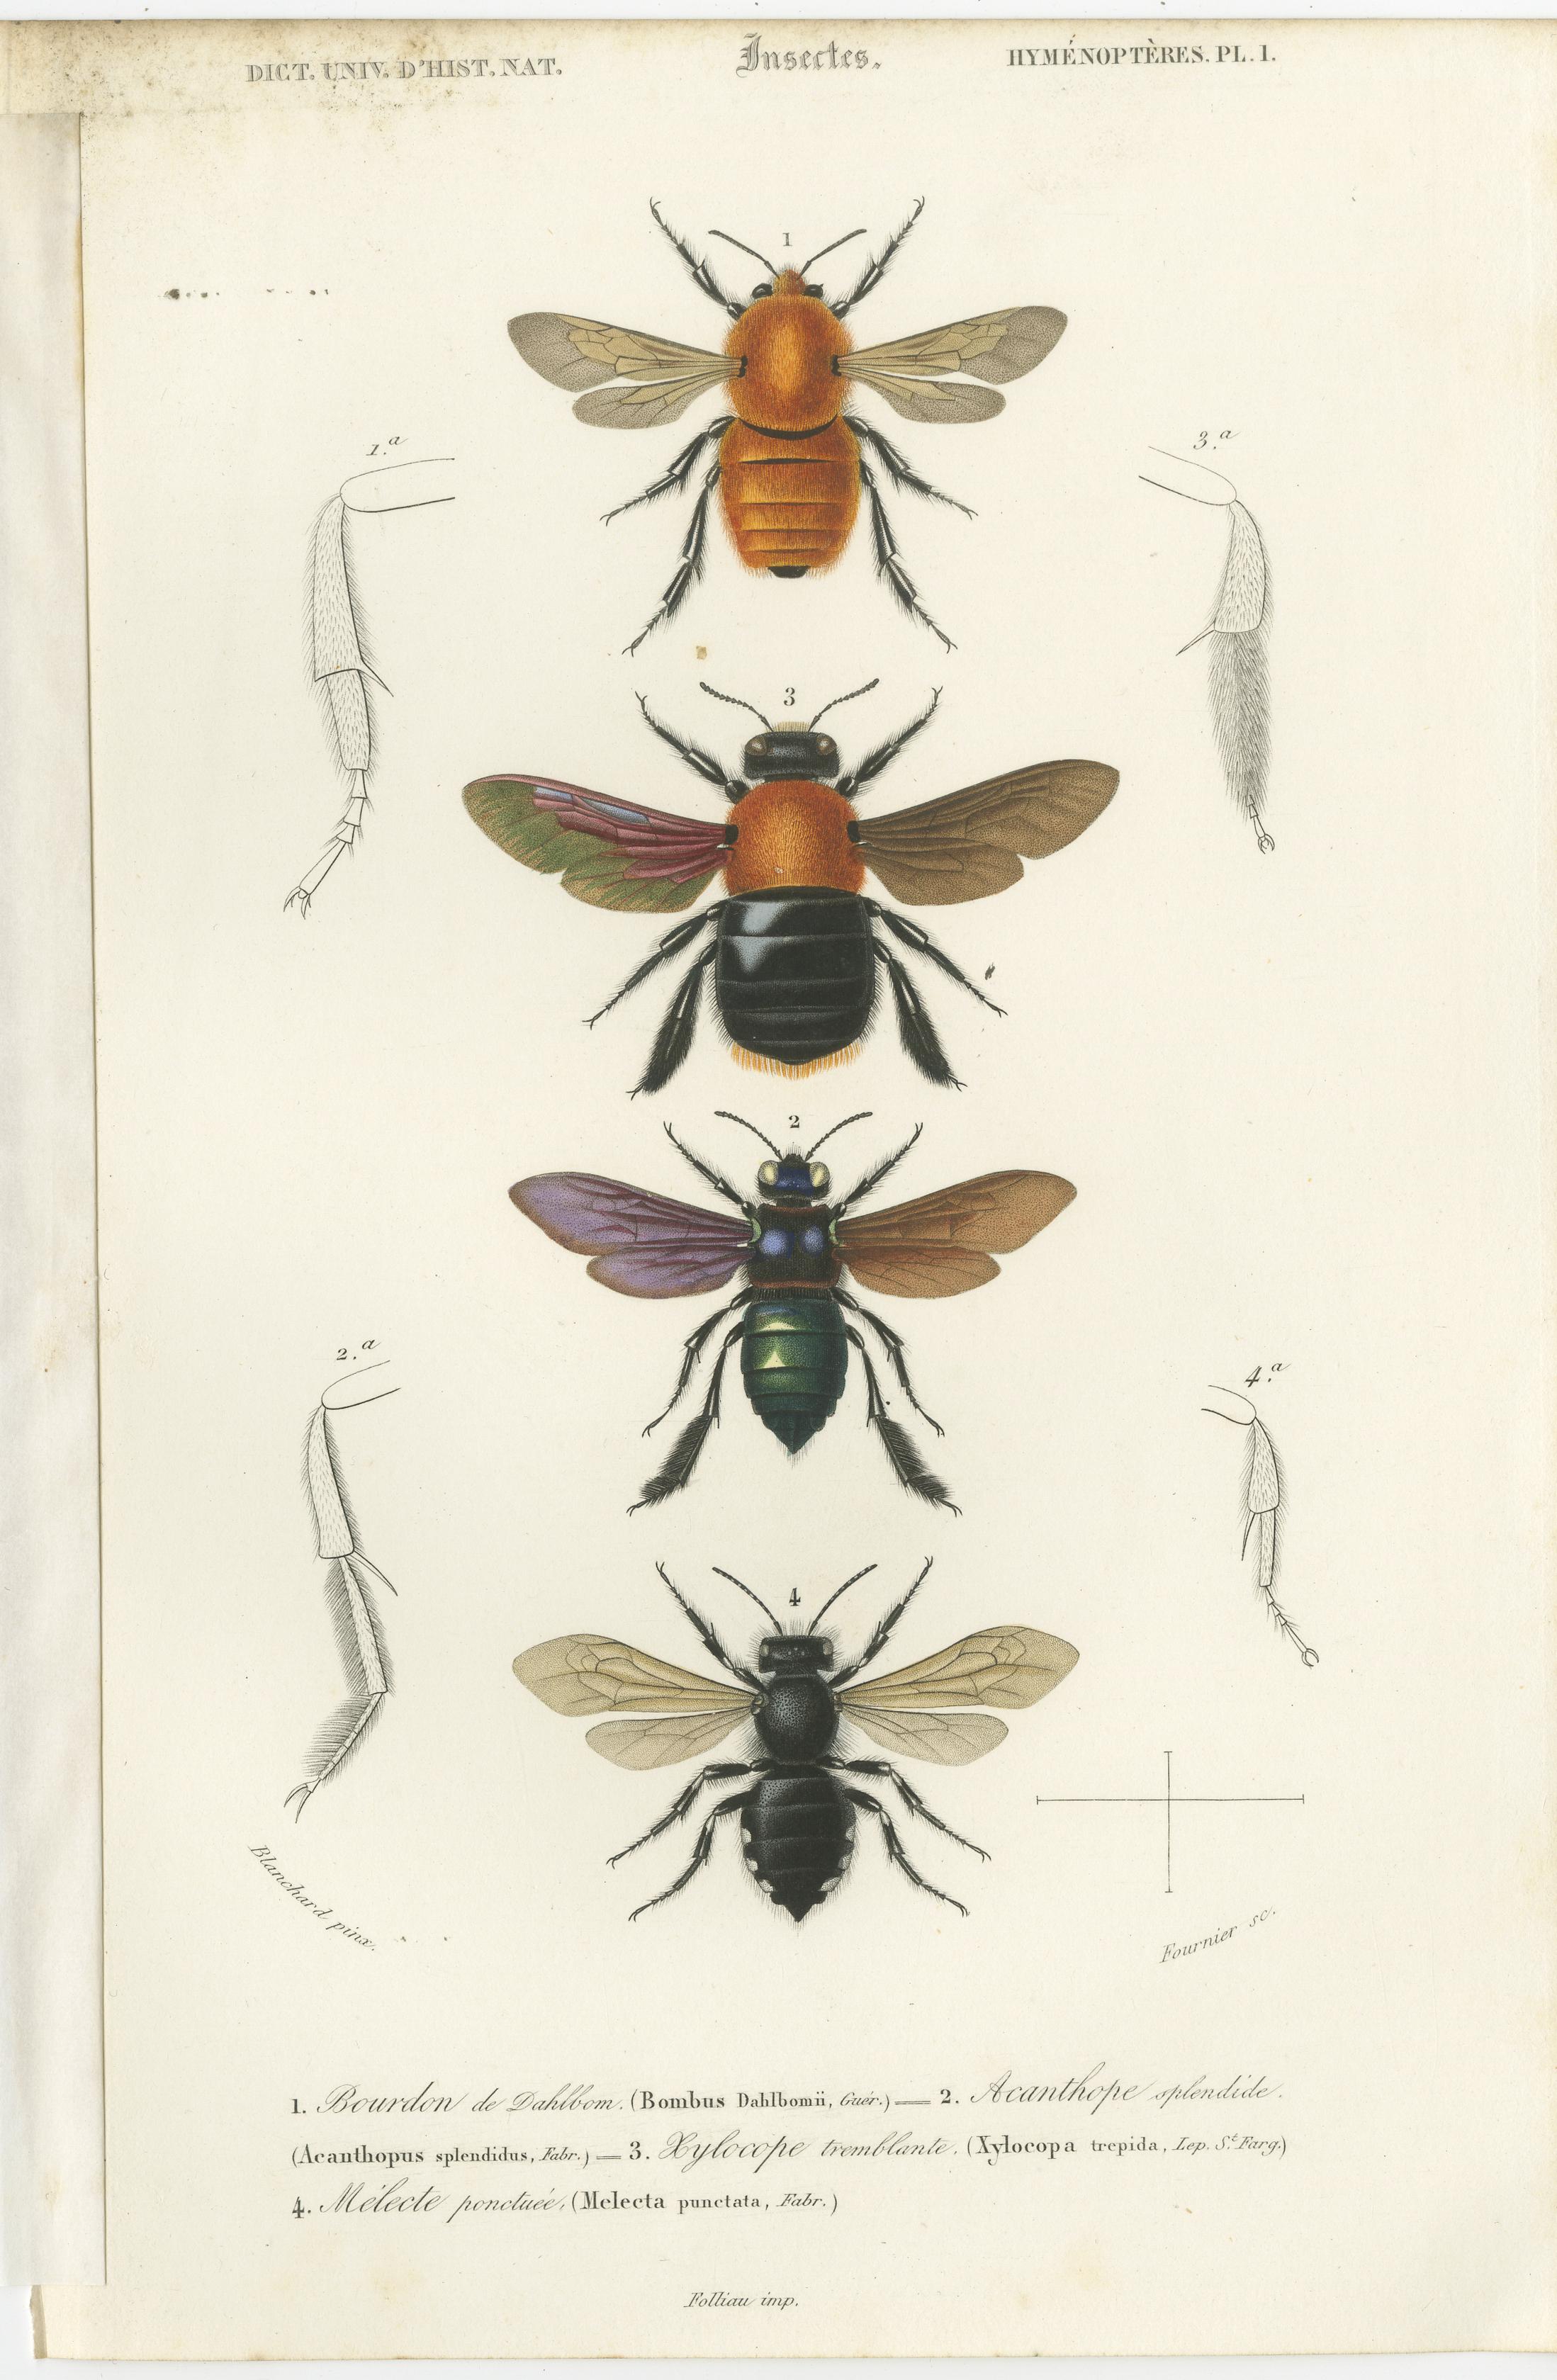 Set of 5 original antique prints of diptera (flies) and hymenoptera insects. These prints originate from 'Dictionnaire universel d'Histoire Naturelle' by d'Orbigny. Published 1861. 

Charles Henry Dessalines d'Orbigny was a French botanist and